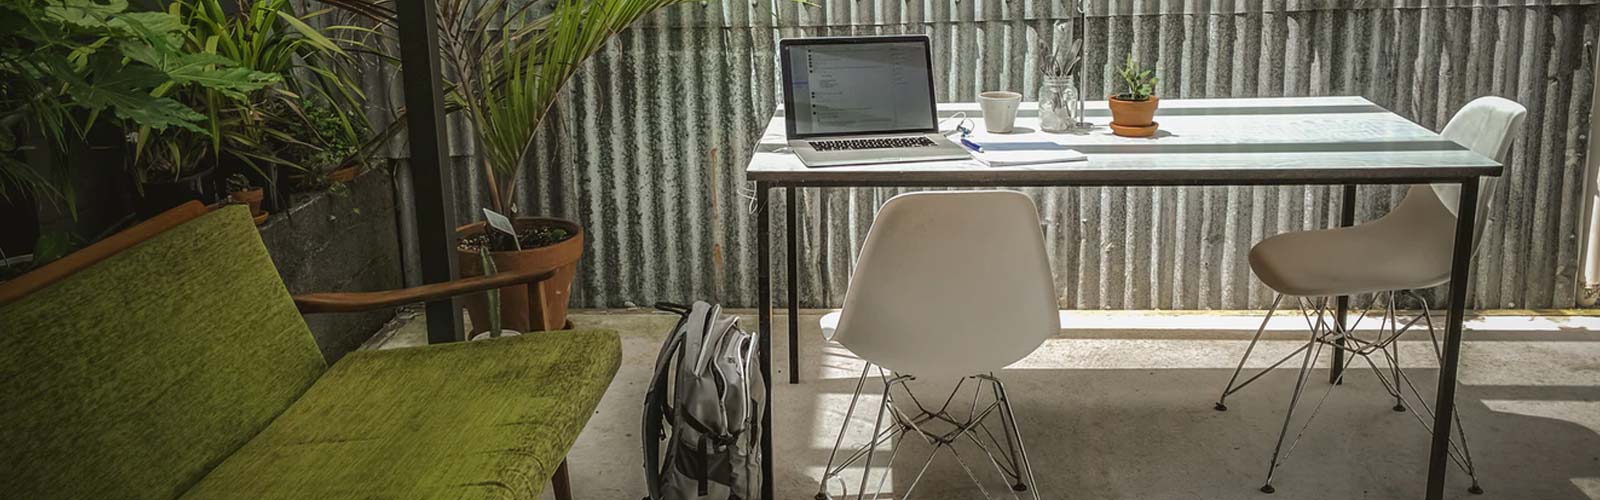 The benefits of an outdoor workspace